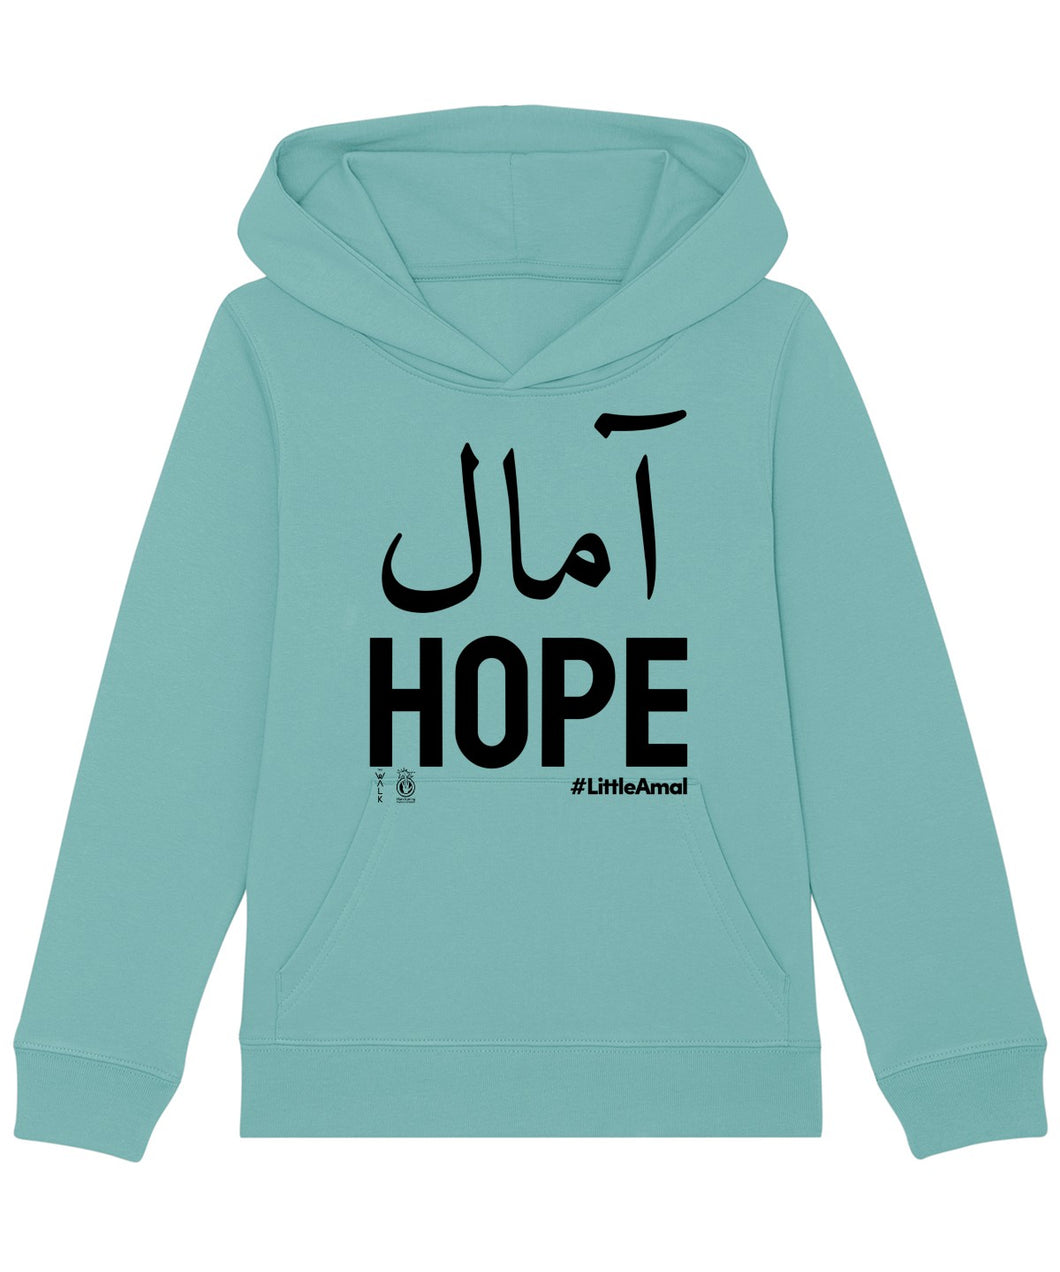 Hope - Black Print - Youth Hoody - Available in 4 Colours